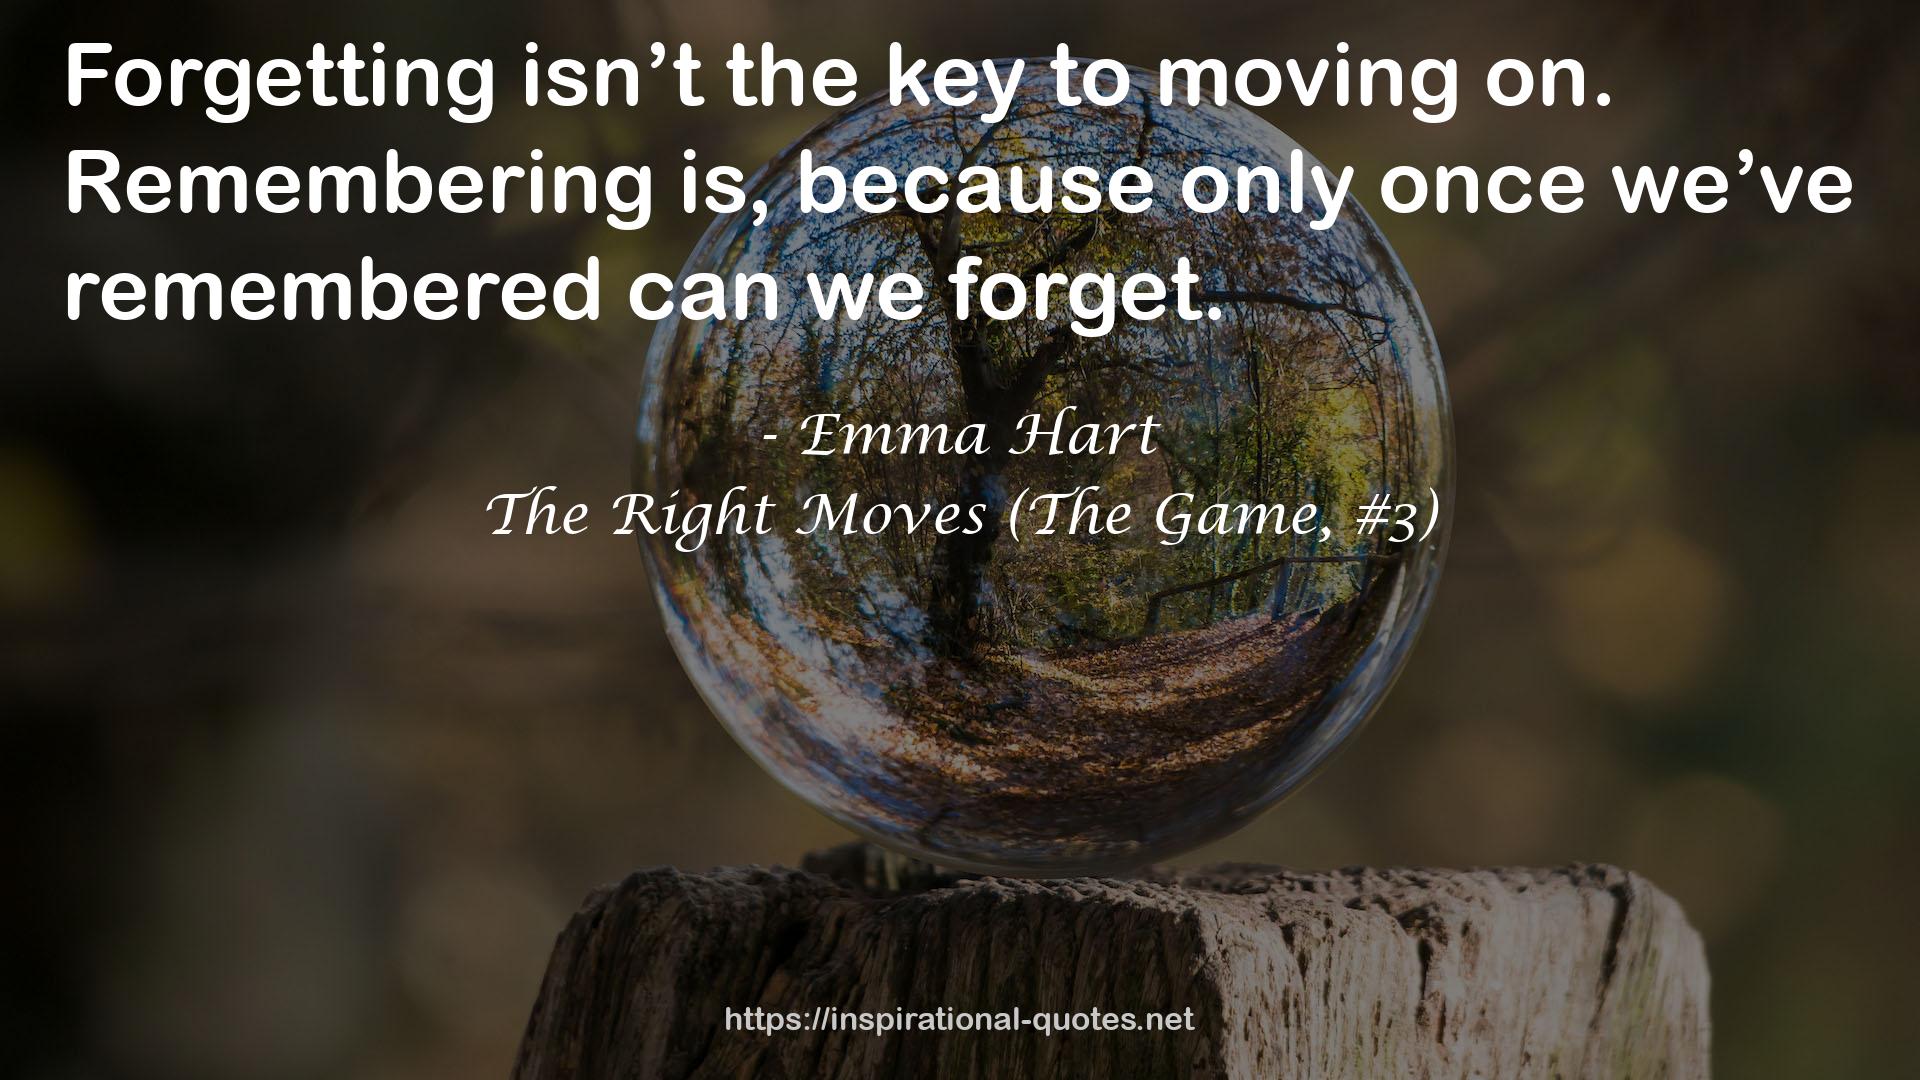 The Right Moves (The Game, #3) QUOTES